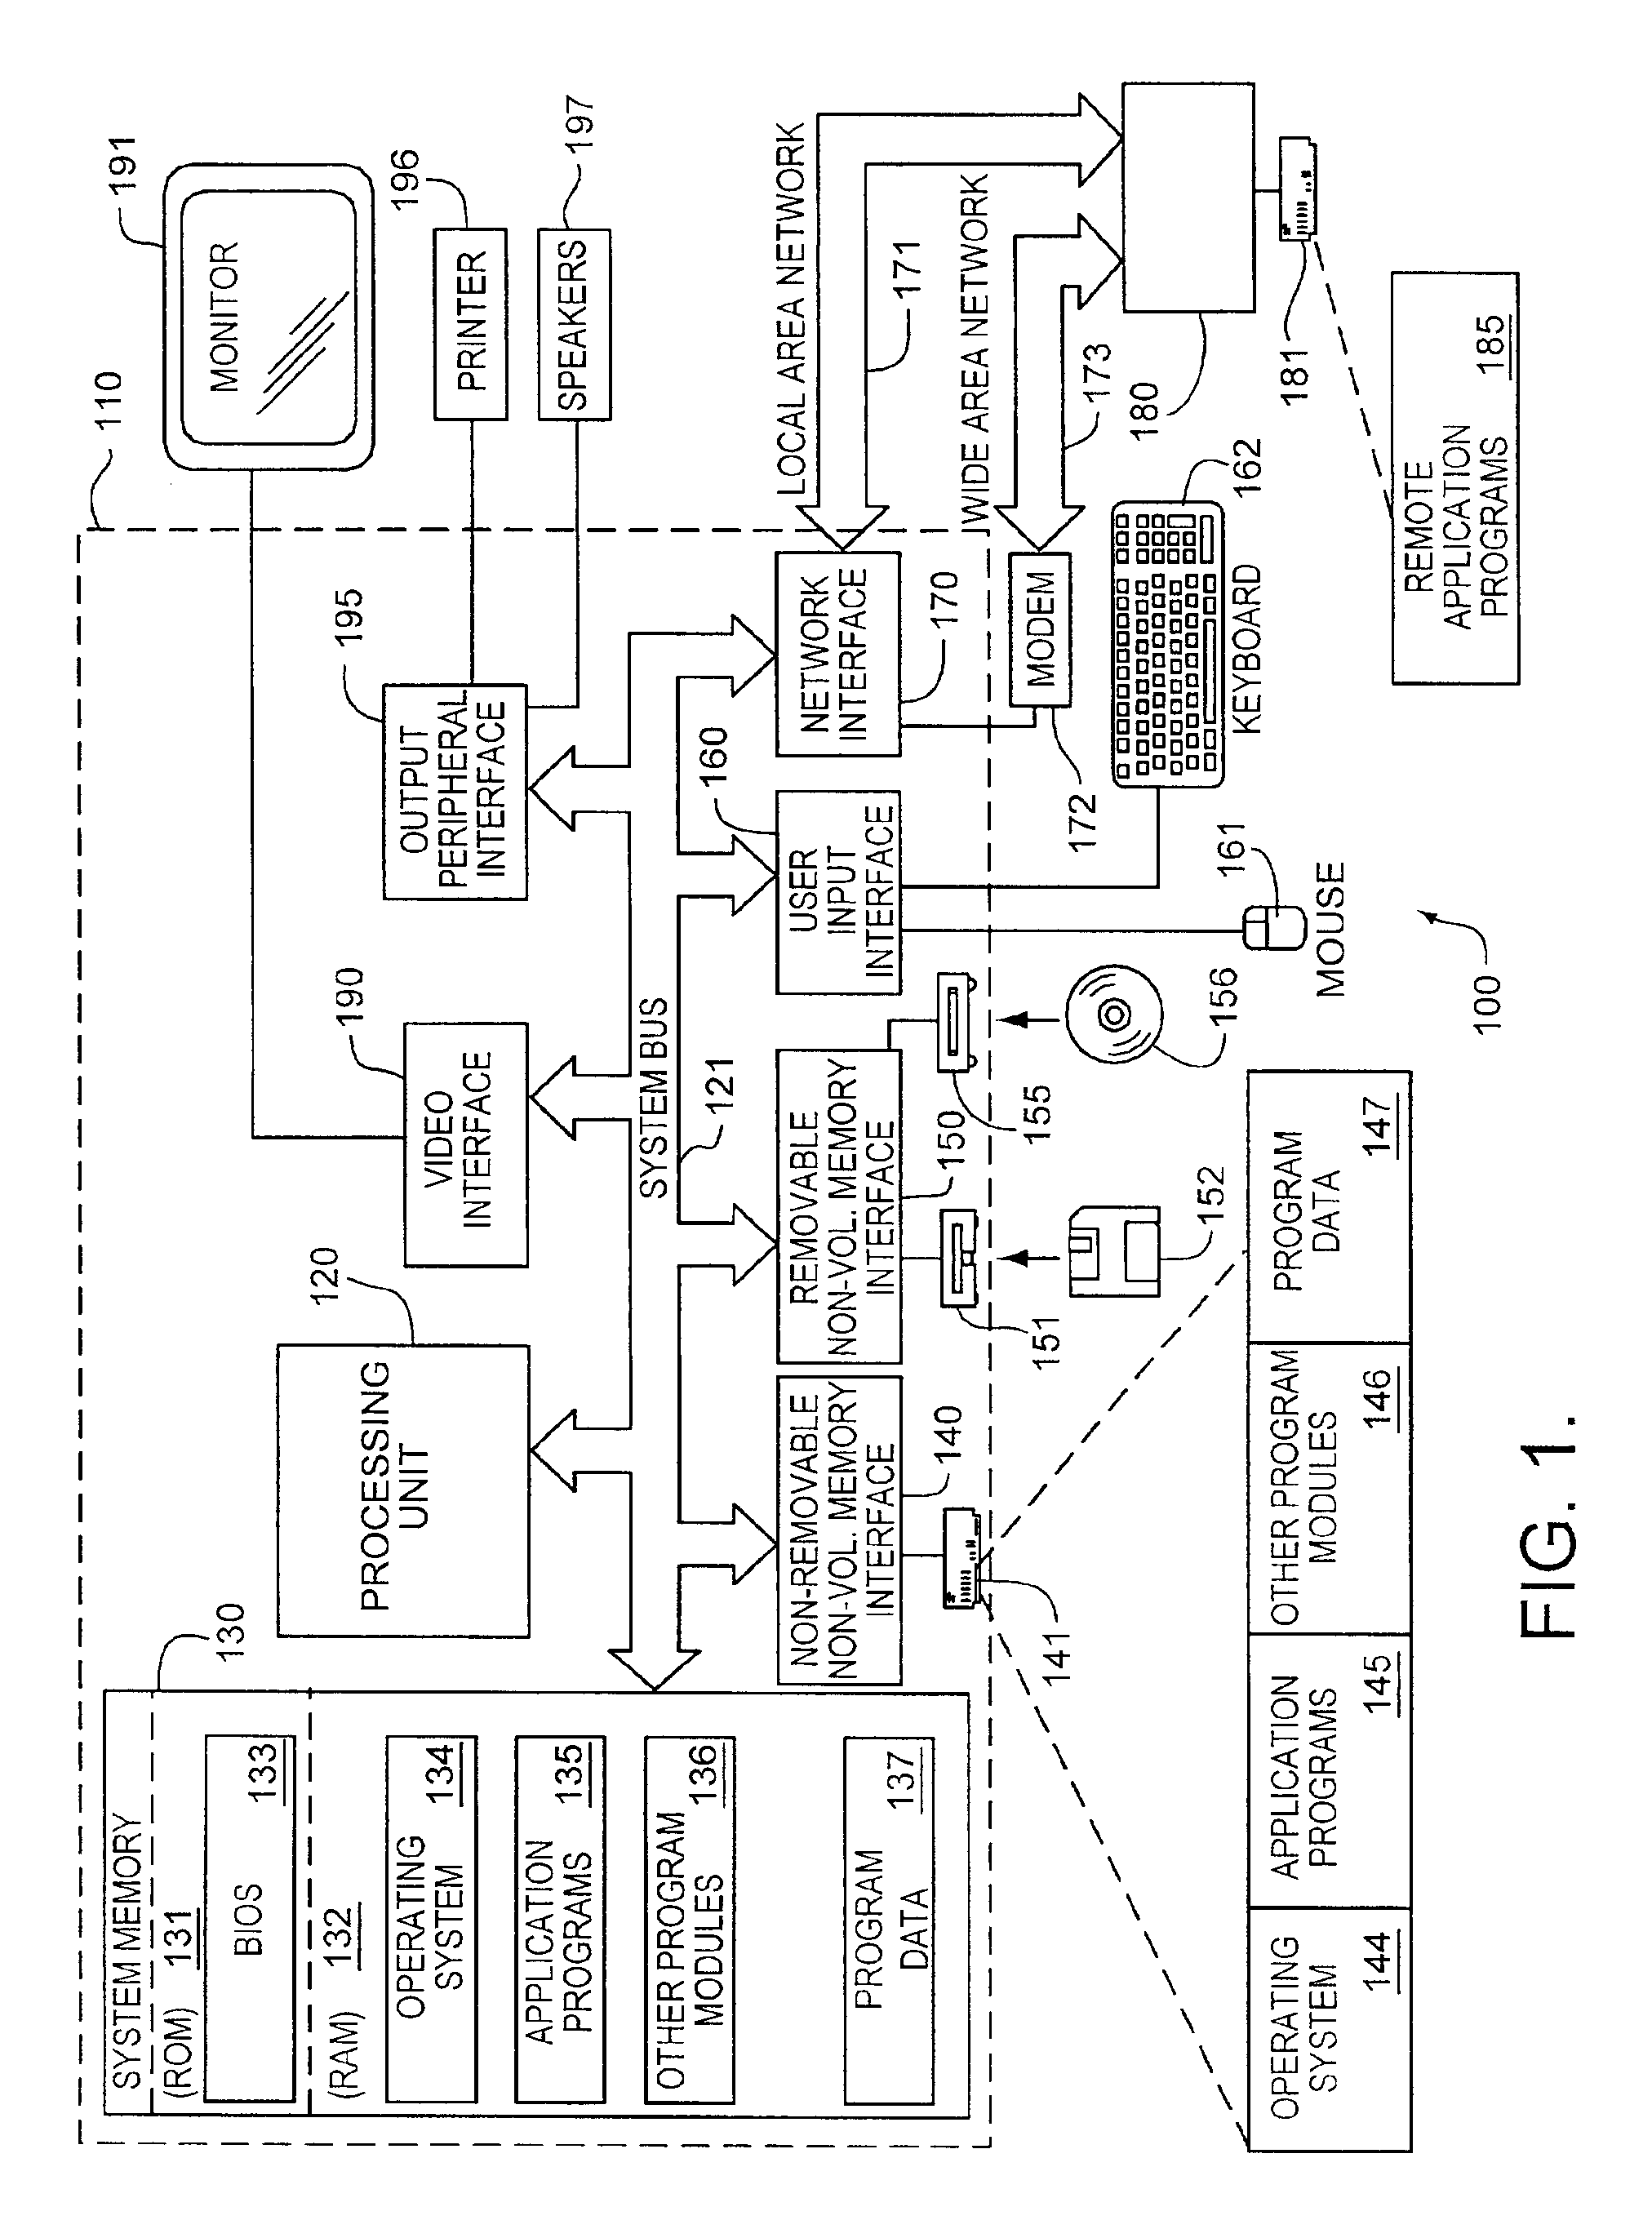 System and method for distributed imaging